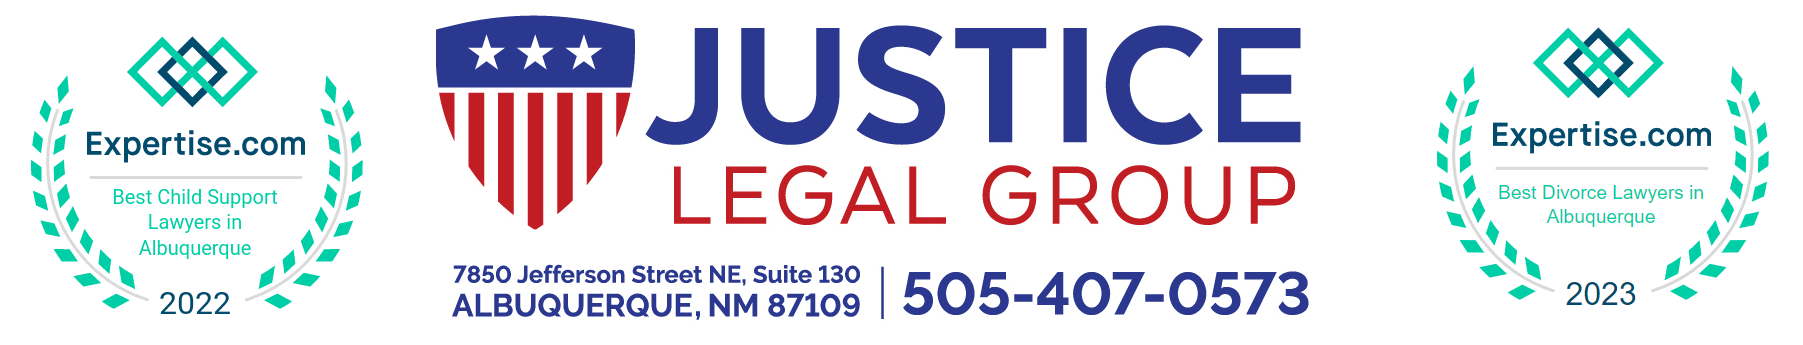 Justice Legal Group